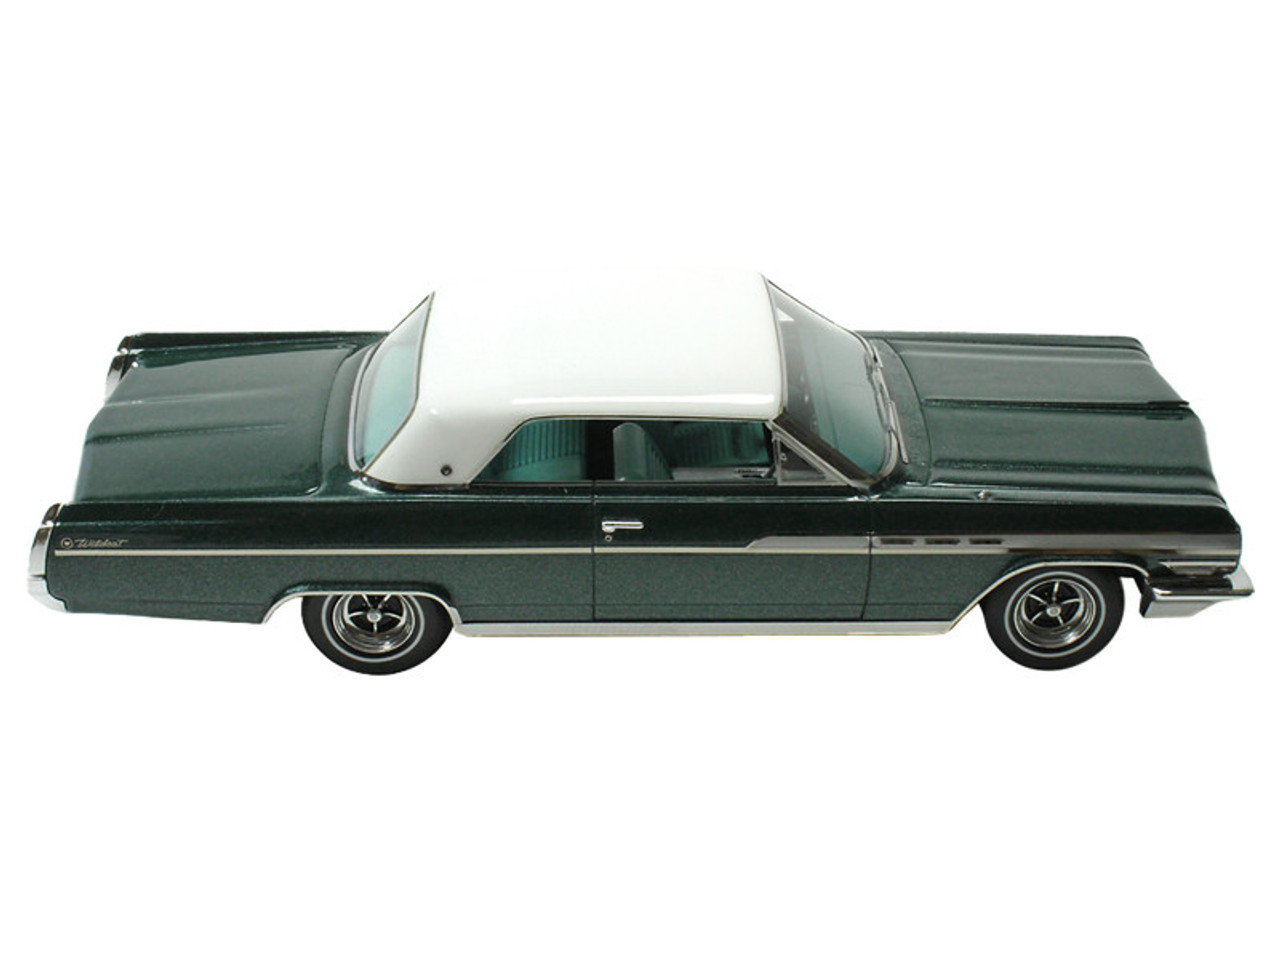 1963 Buick Wildcat Twilight Aqua Blue Metallic with Blue Interior and White Top Limited Edition to 200 pieces Worldwide 1/43 Model Car by Goldvarg Collection